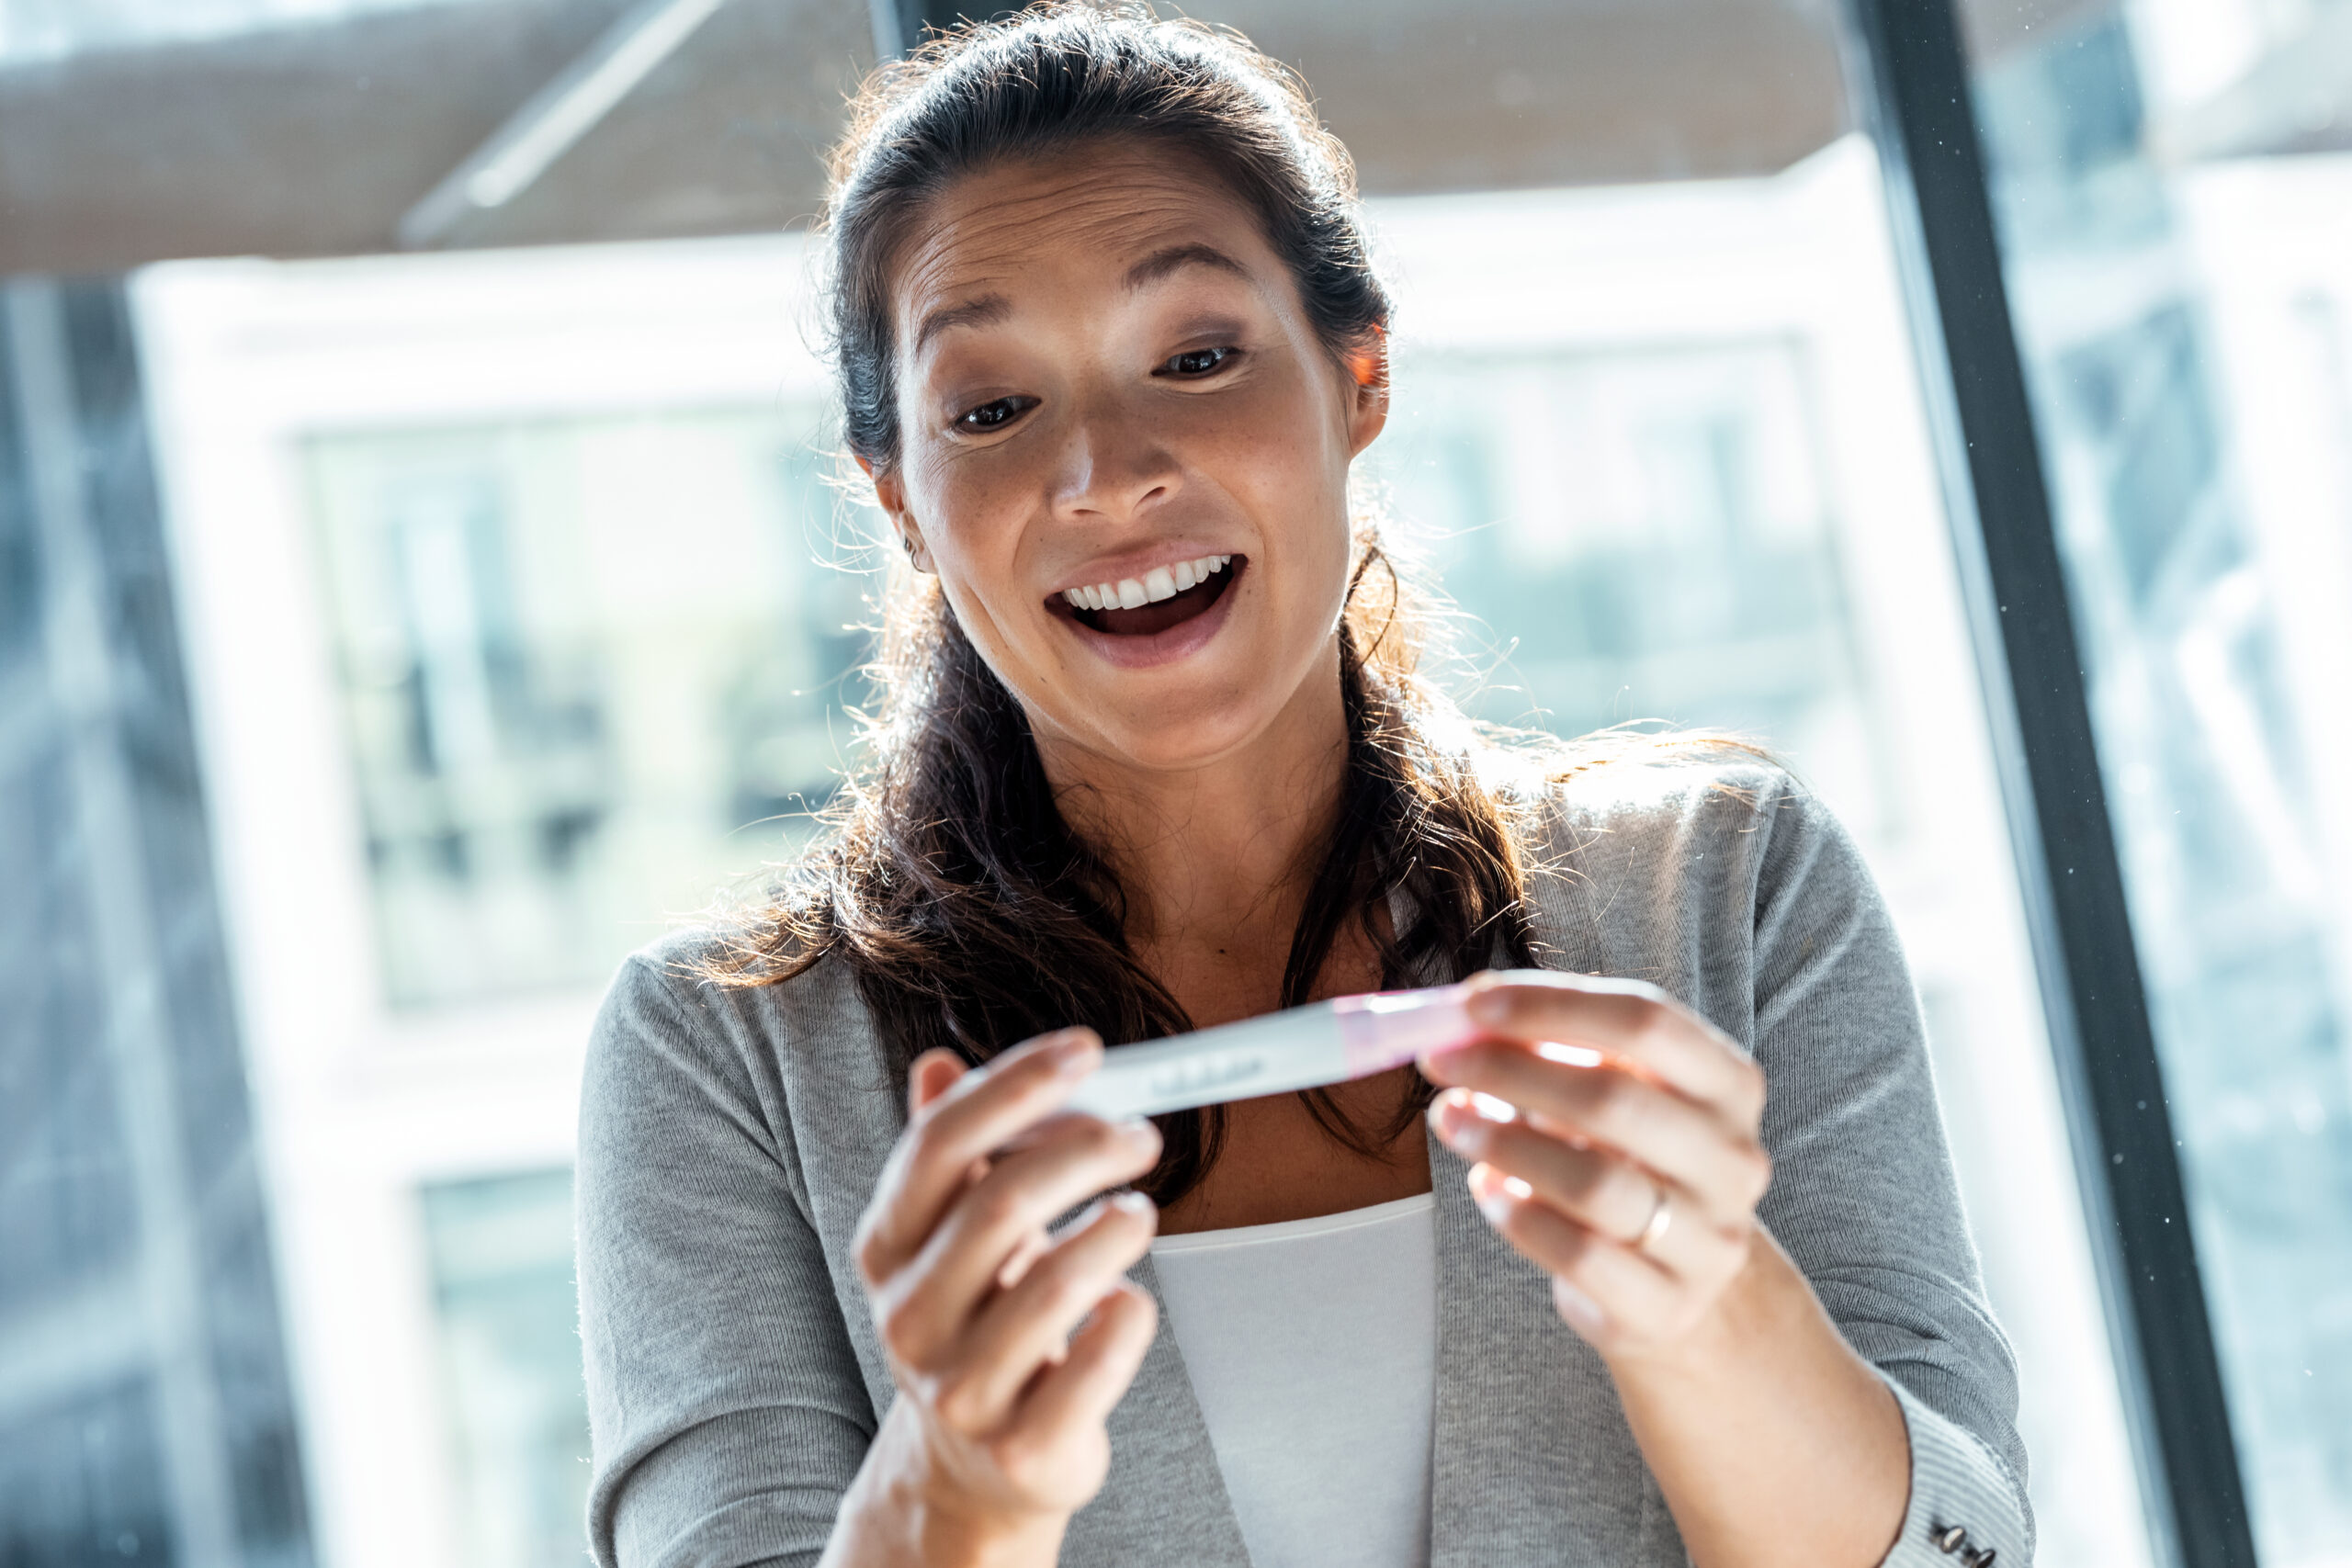 Fertility And Reproductive Health
Several factors can affect fertility, impacting a person or couple's ability to conceive and have a successful pregnancy.